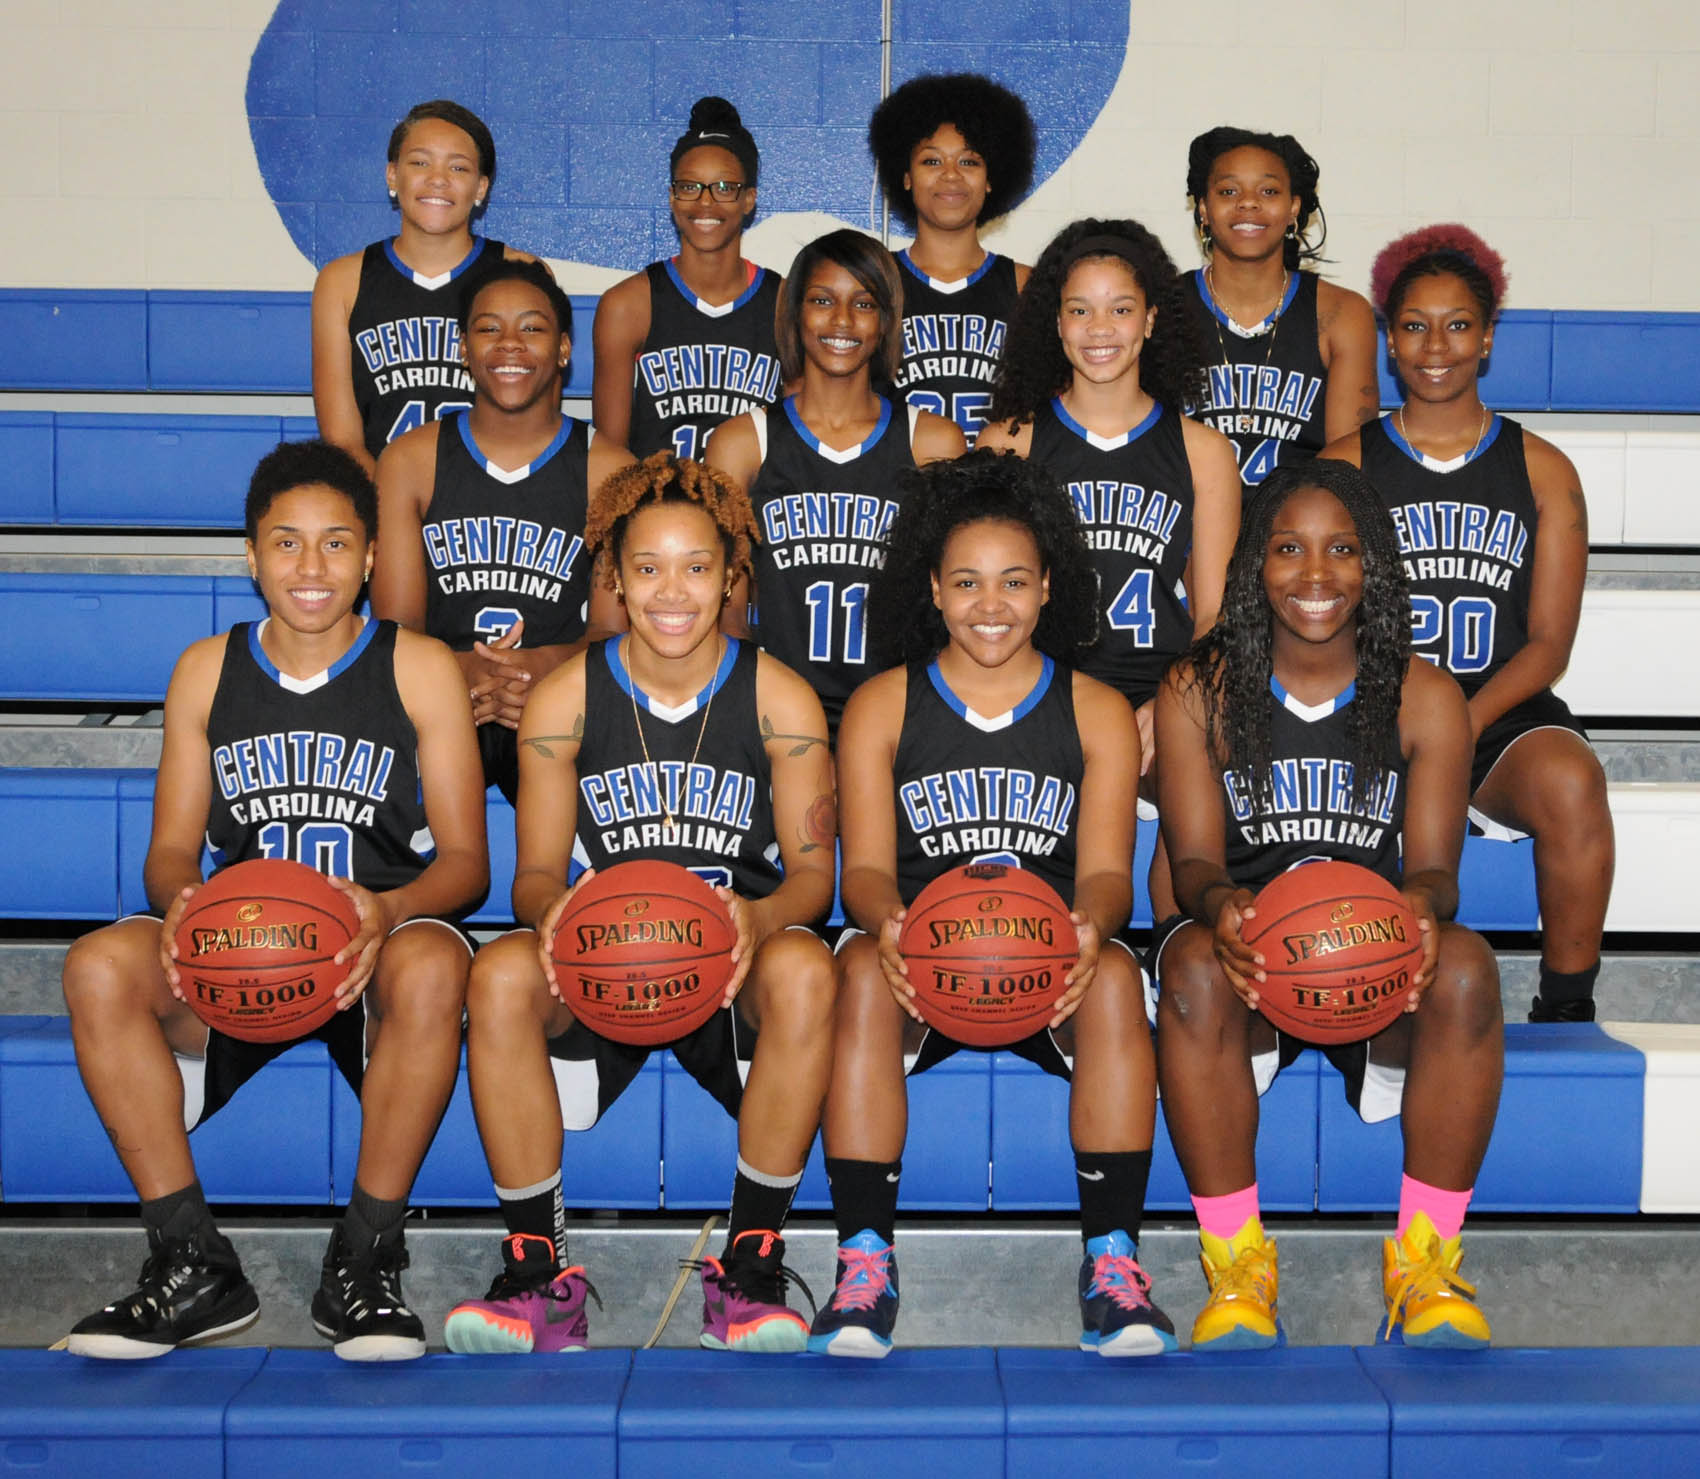 CCCC women's basketball is on the move